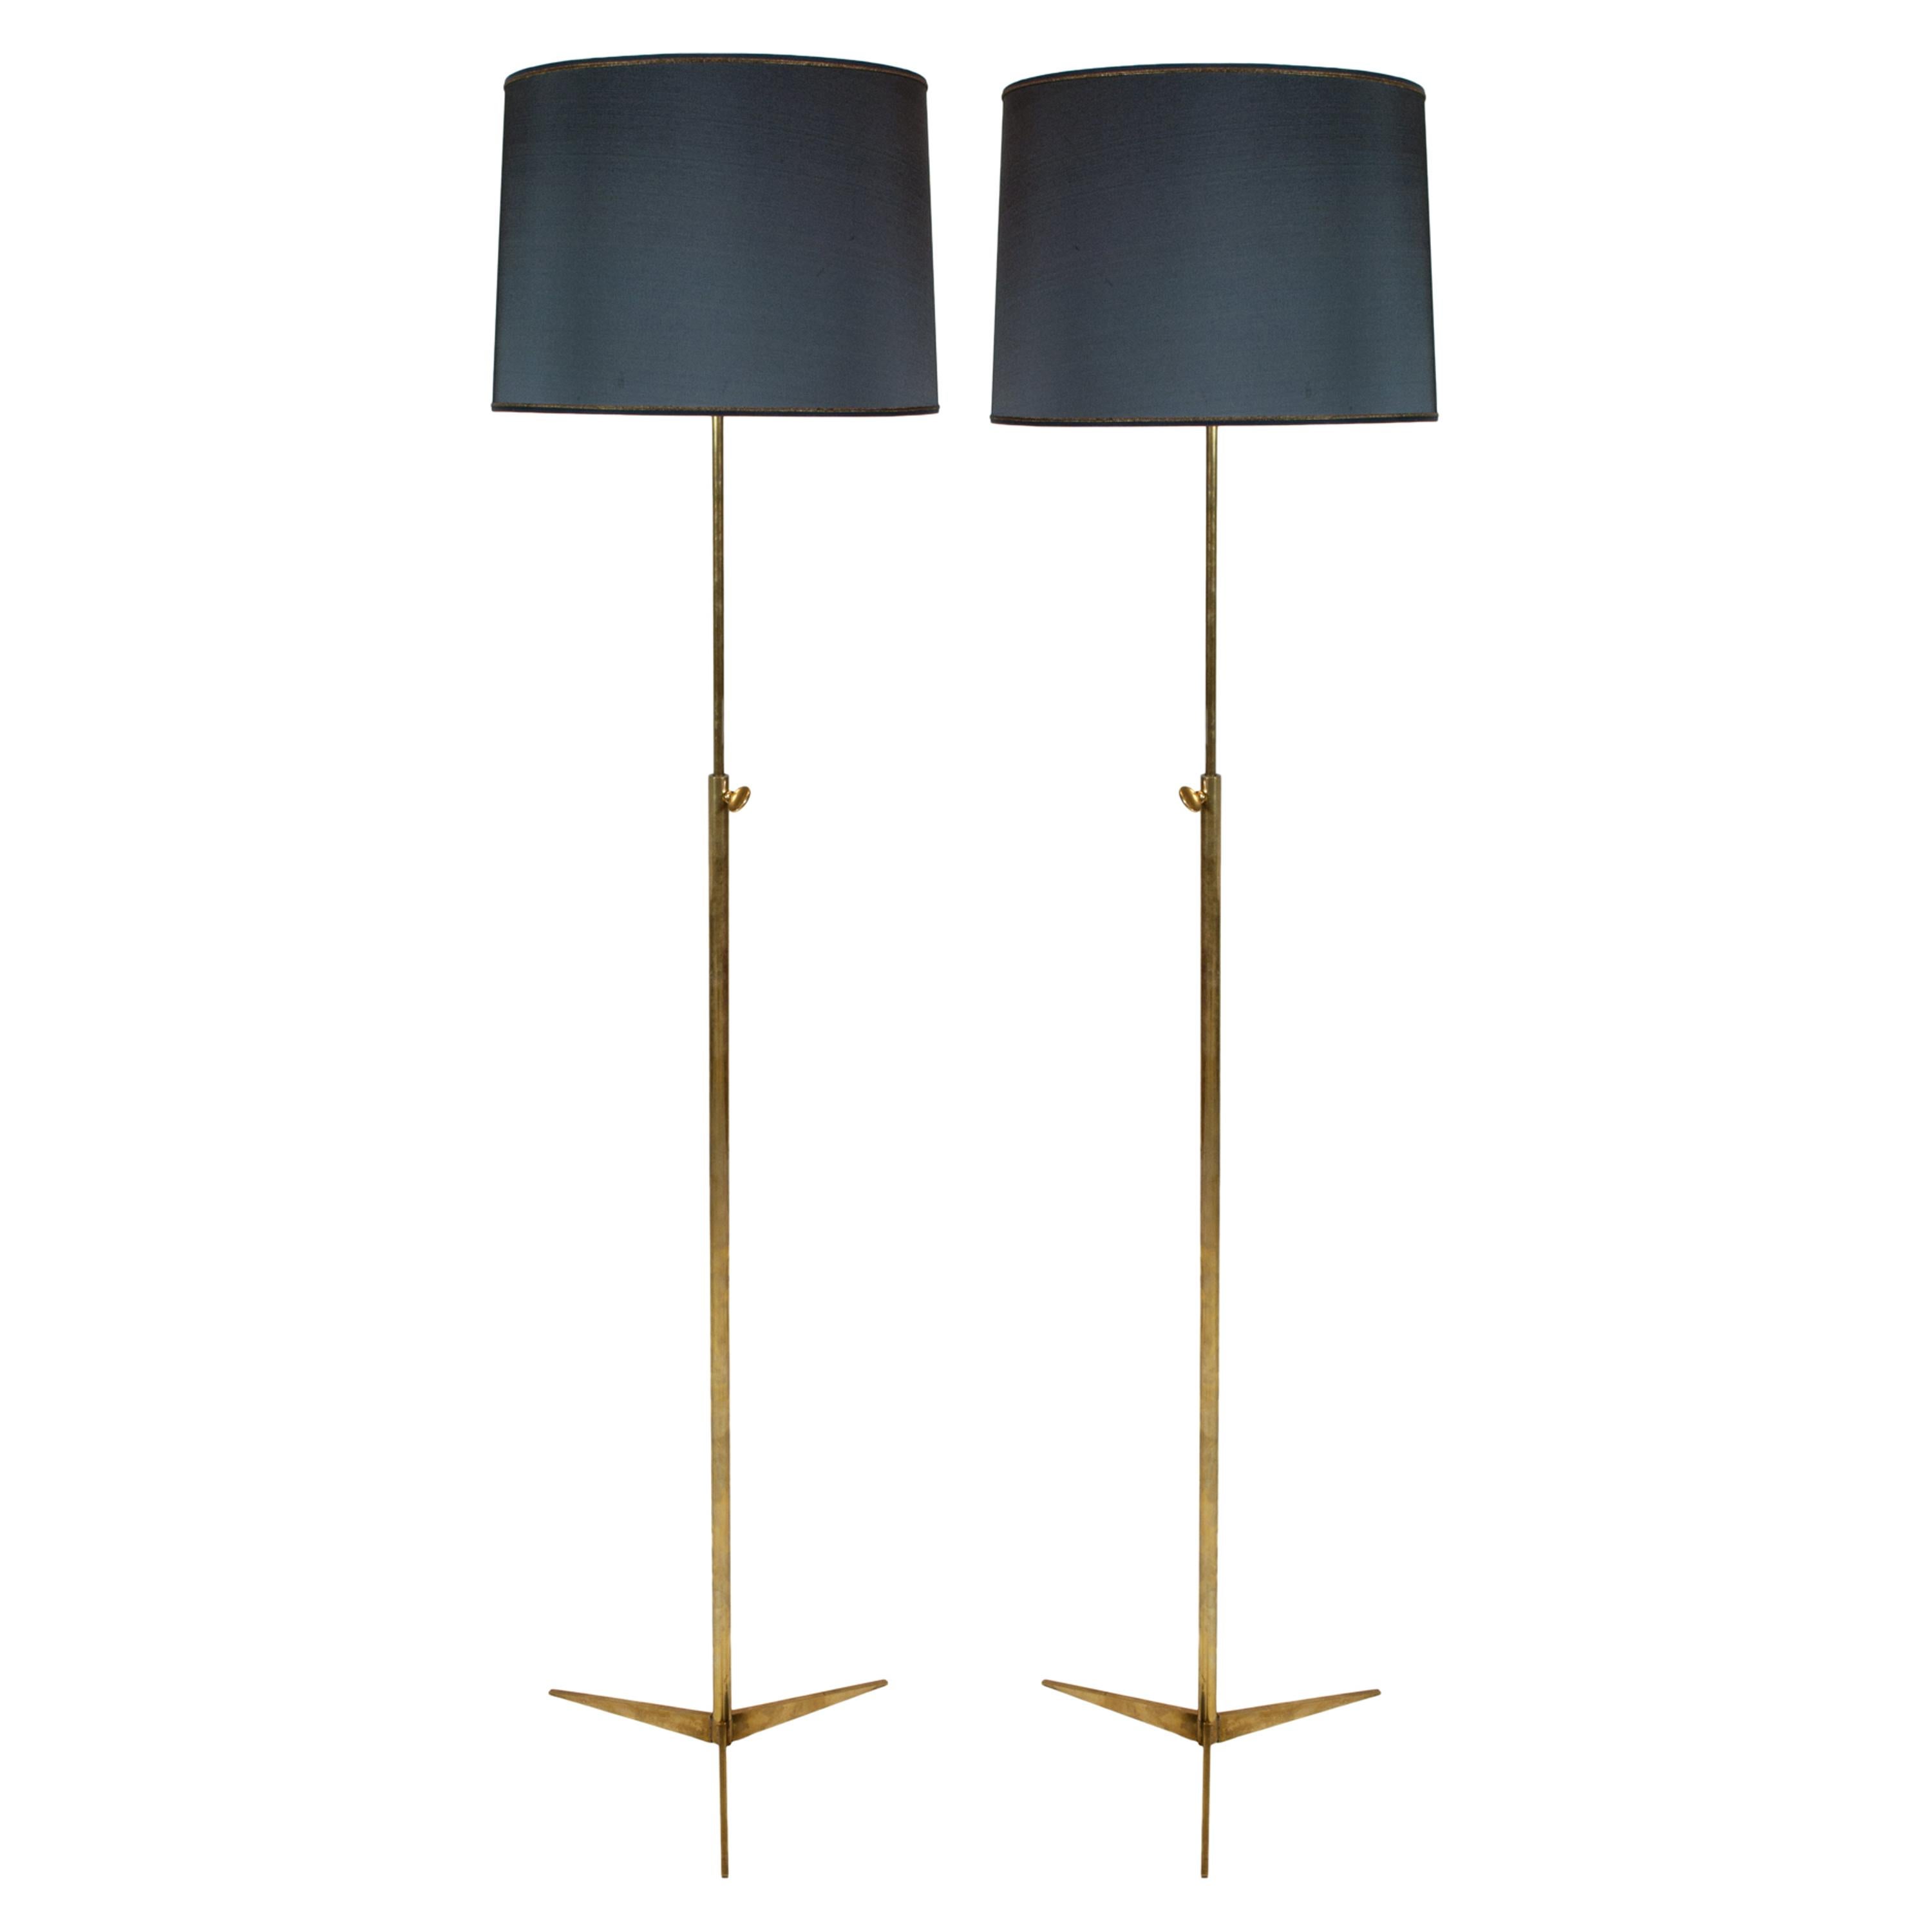 Pair of Mid-20th Century Gilt Bronze Standing Lamps on Tripod Feet